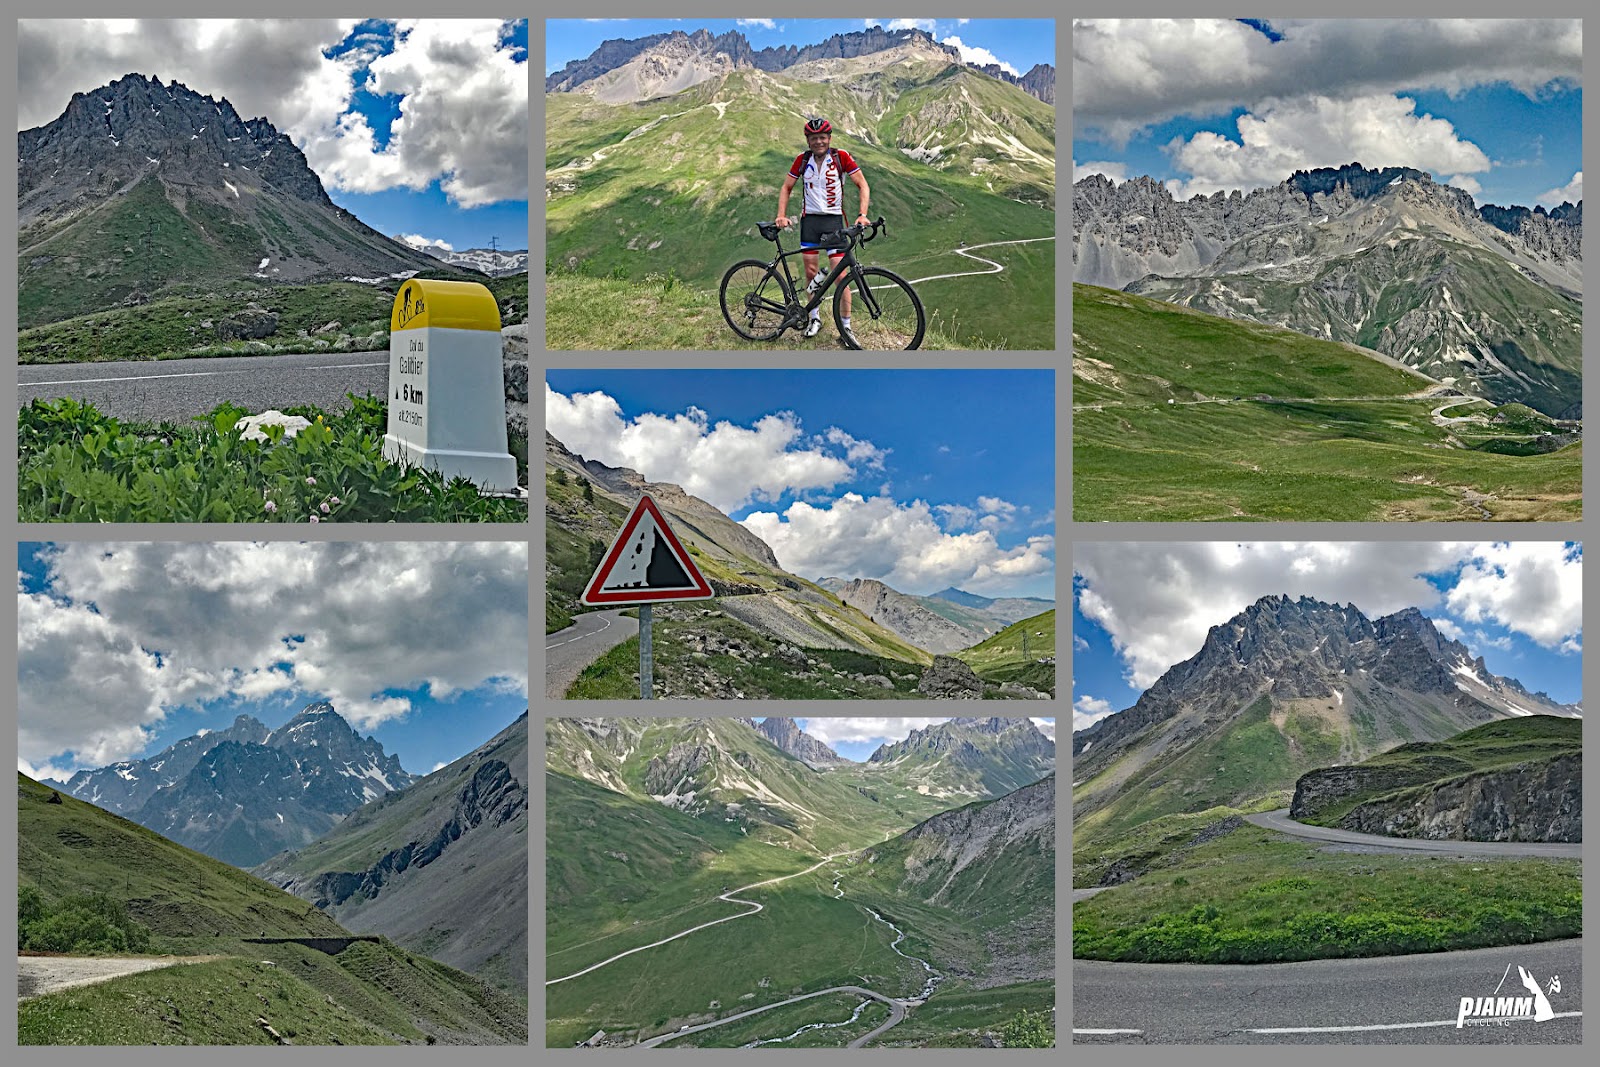 Cycling Col du Galibier from Valloire: photo collage shows beautiful mountainous French Alps scenery along the climb: sharp mountaintops, lush green hillsides, roadways snaking through the idyllic mountain; yellow & white KM markers